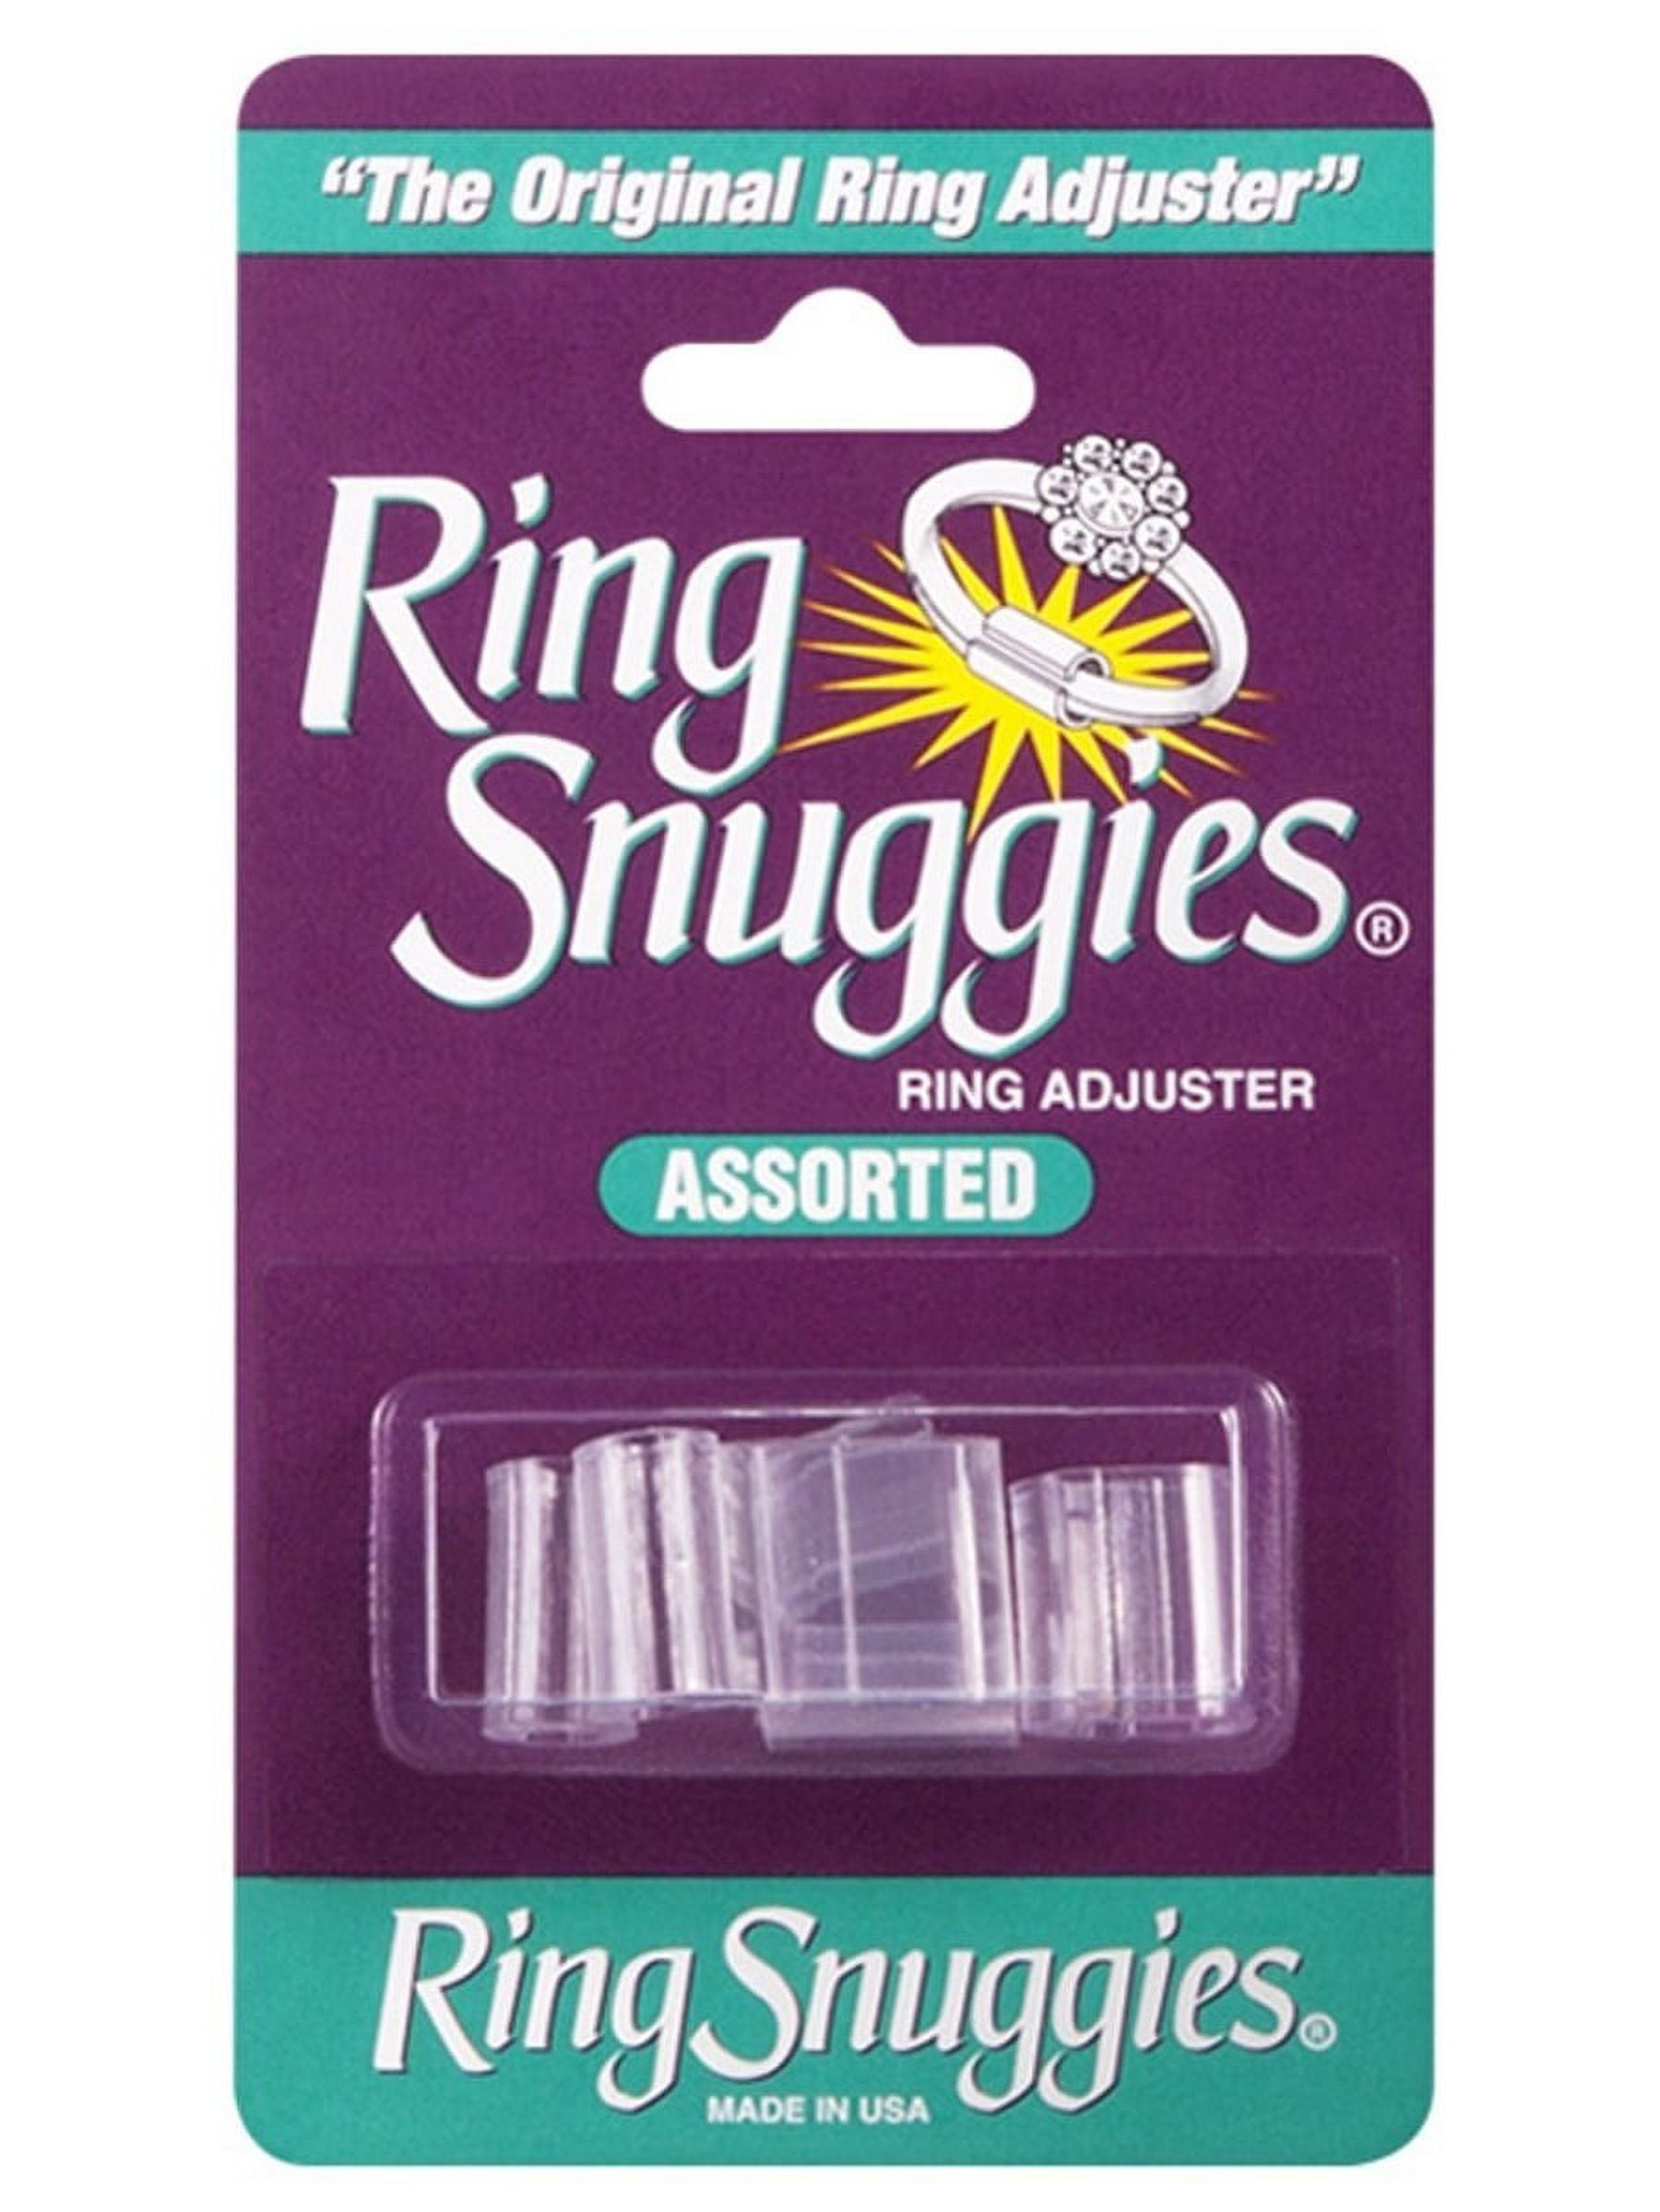 The Original Ring Adjusters Assorted Sizes